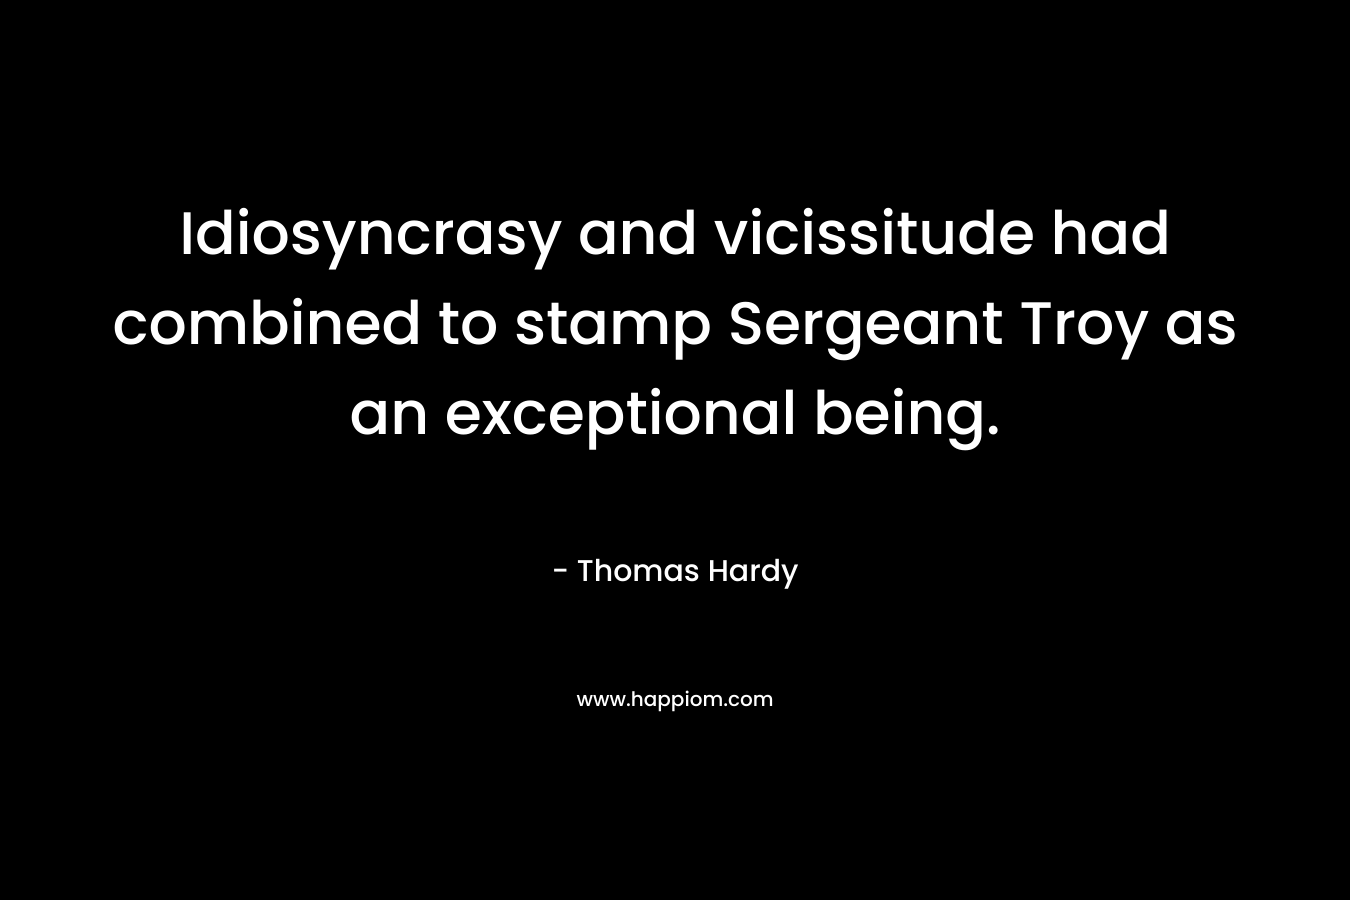 Idiosyncrasy and vicissitude had combined to stamp Sergeant Troy as an exceptional being.